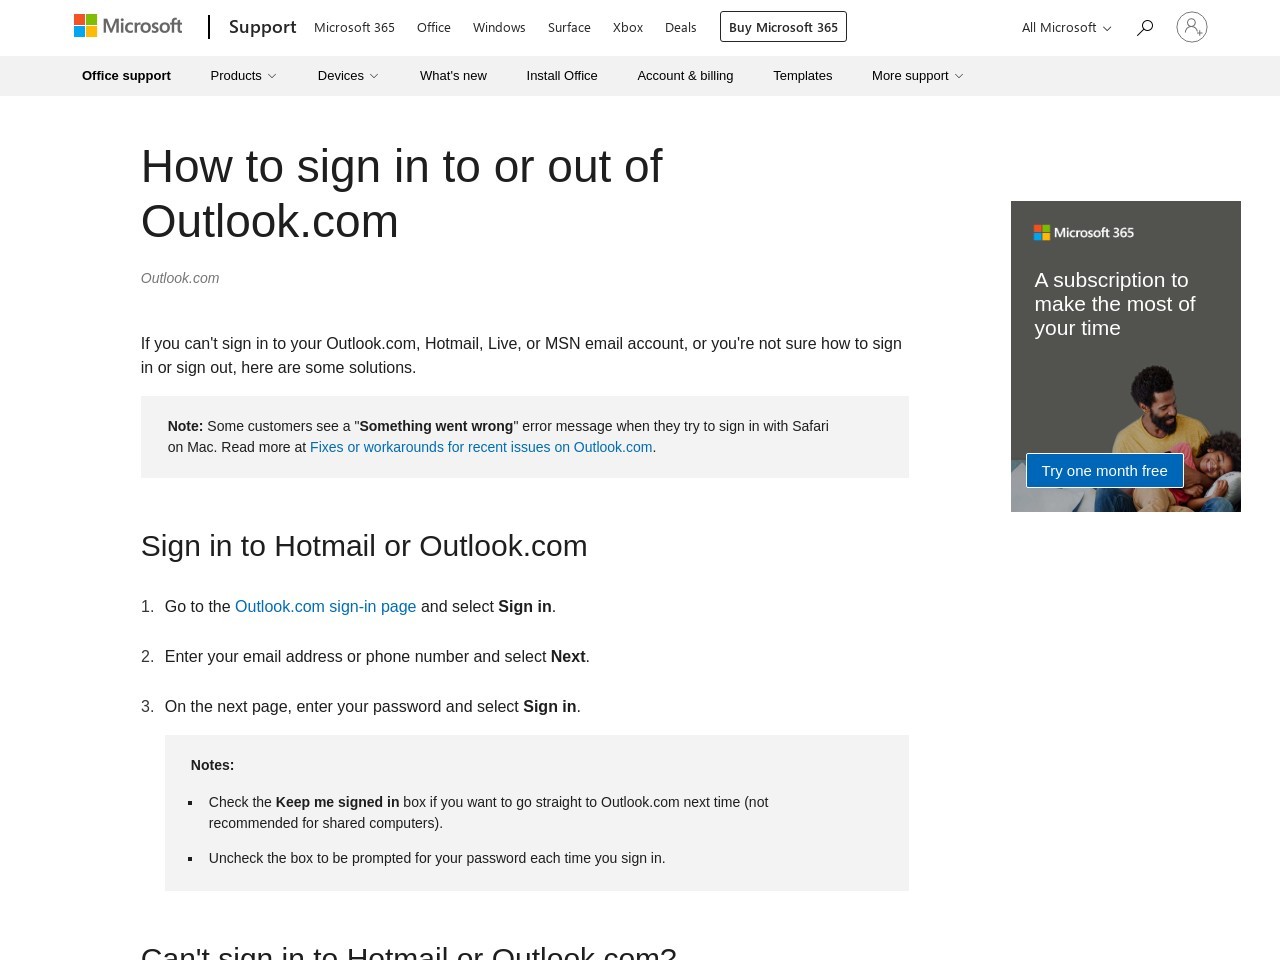 How to sign in or out of Outlook.com - Outlook